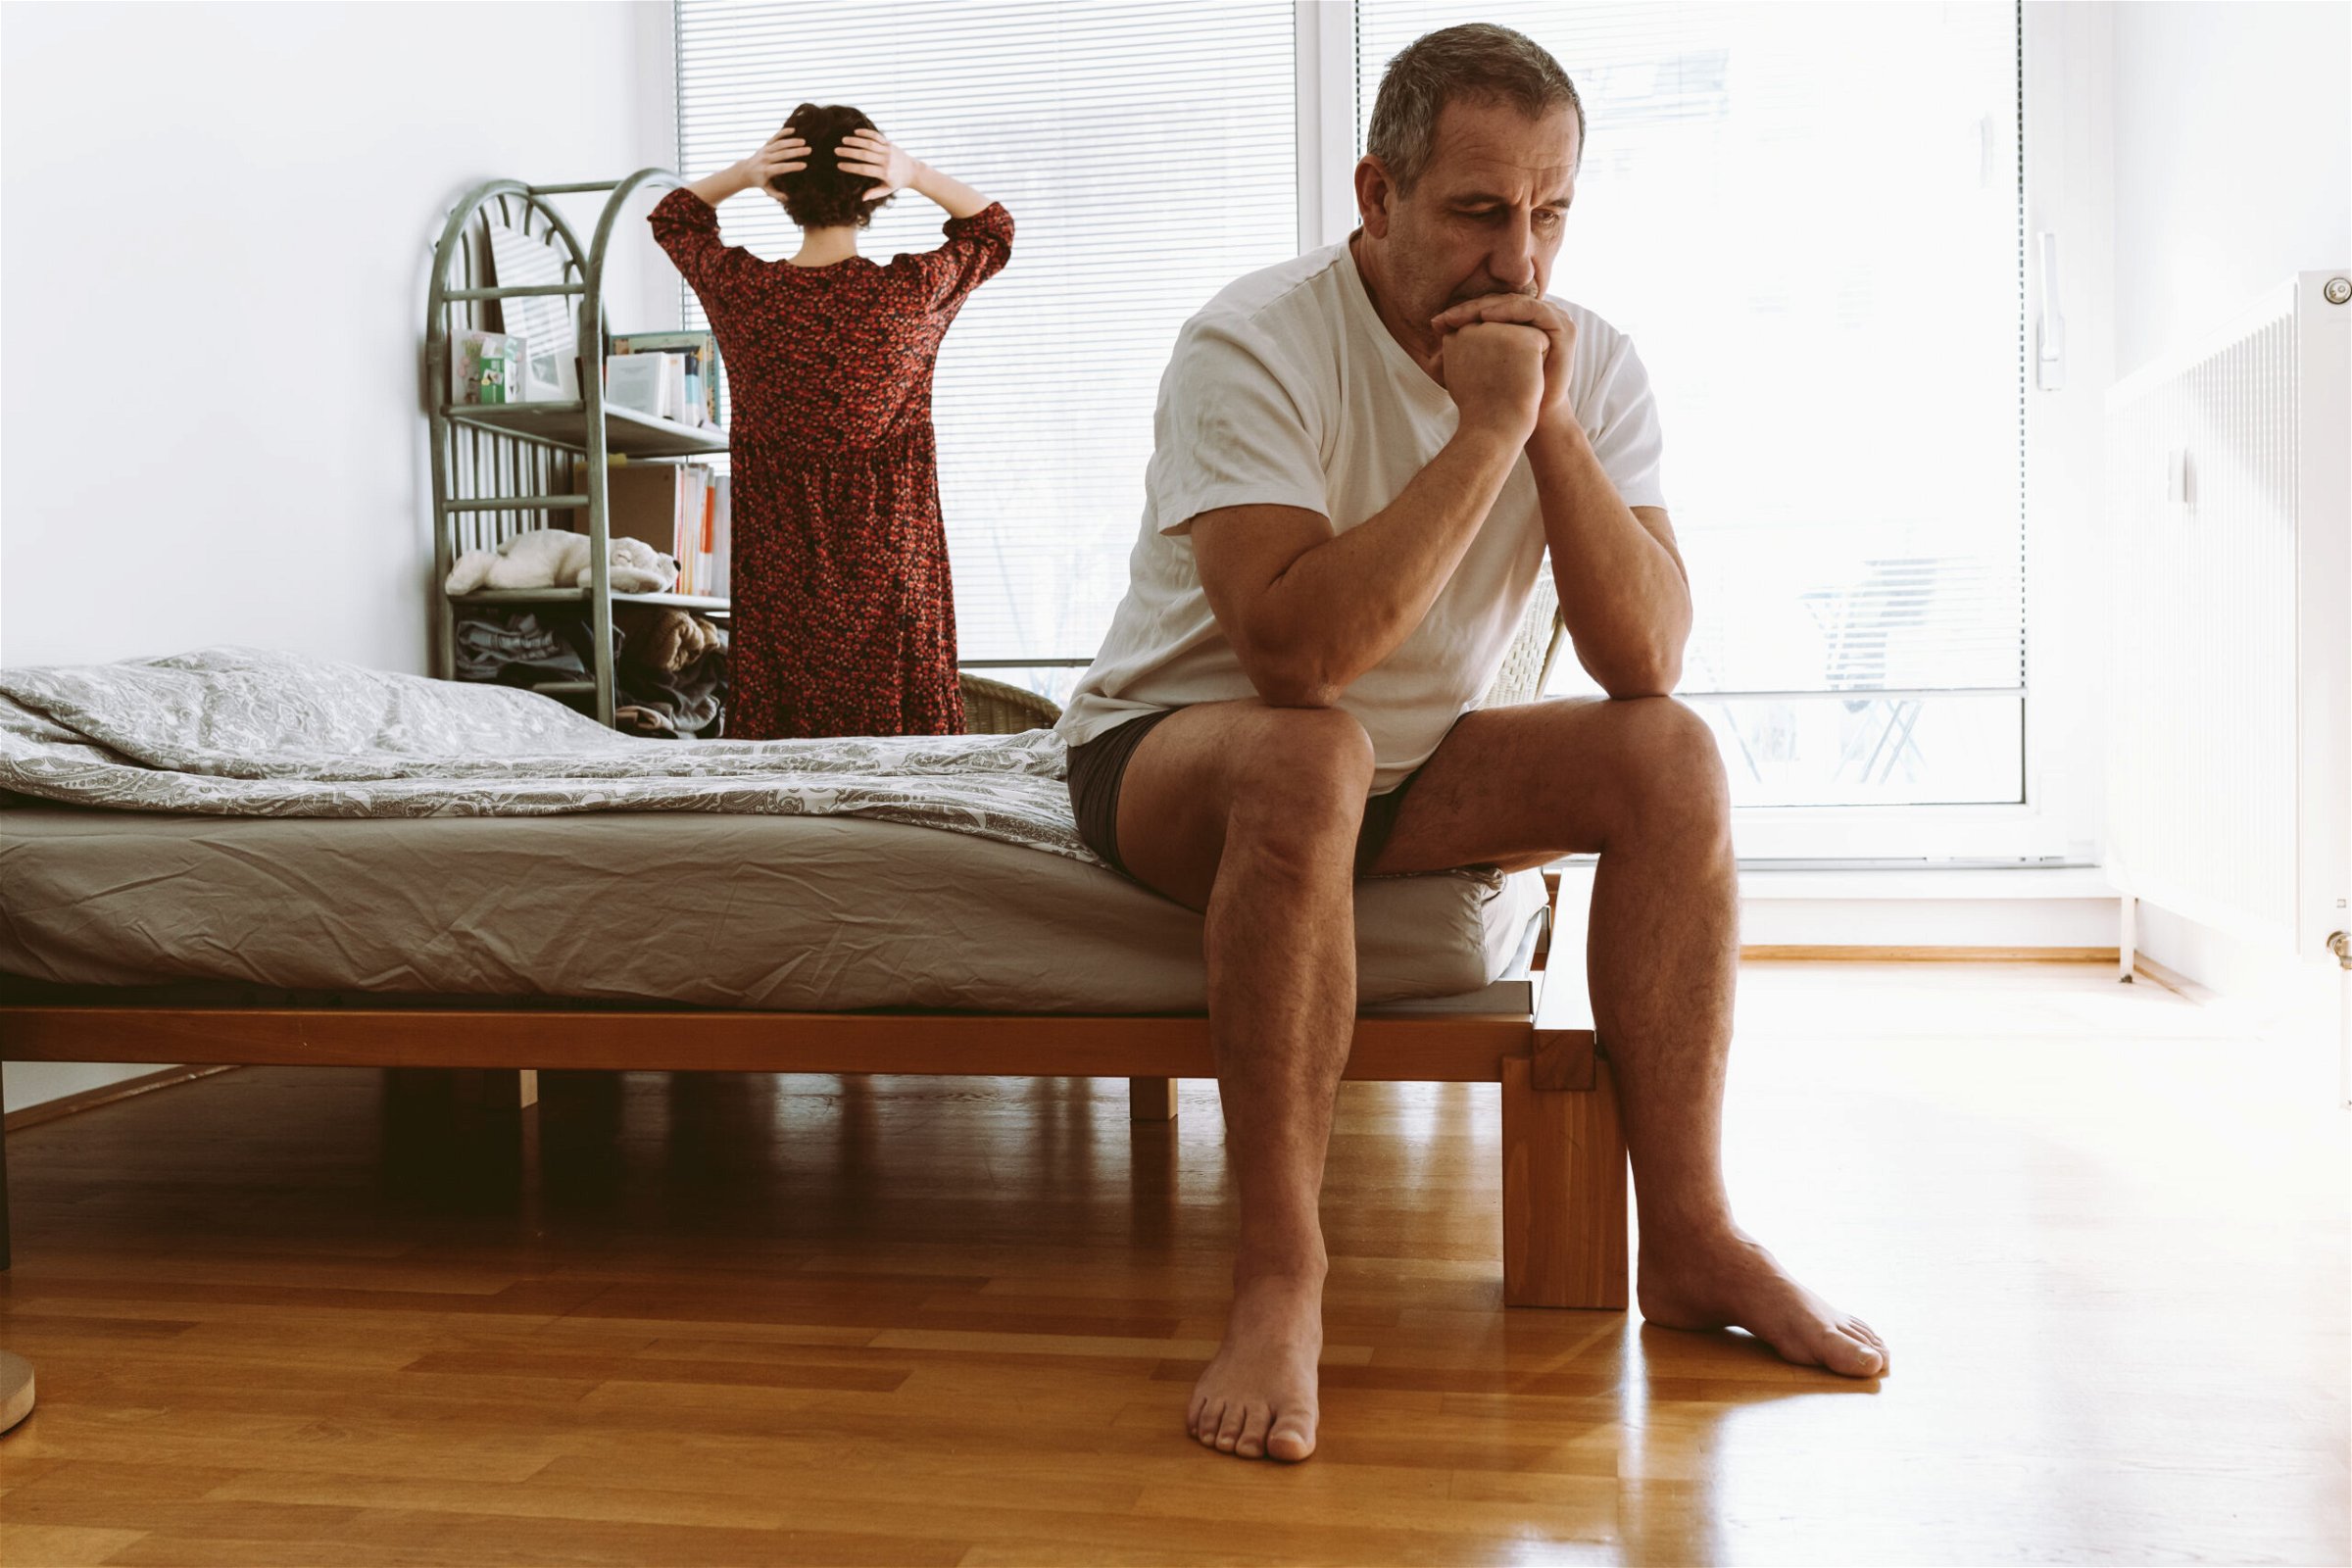 In our experience as a leading Oregon family law firm, we have noticed a pattern of common mistakes people make when undergoing the divorce process. Here are the most recurring ones to help you navigate this challenging phase of your life as smoothly as possible.